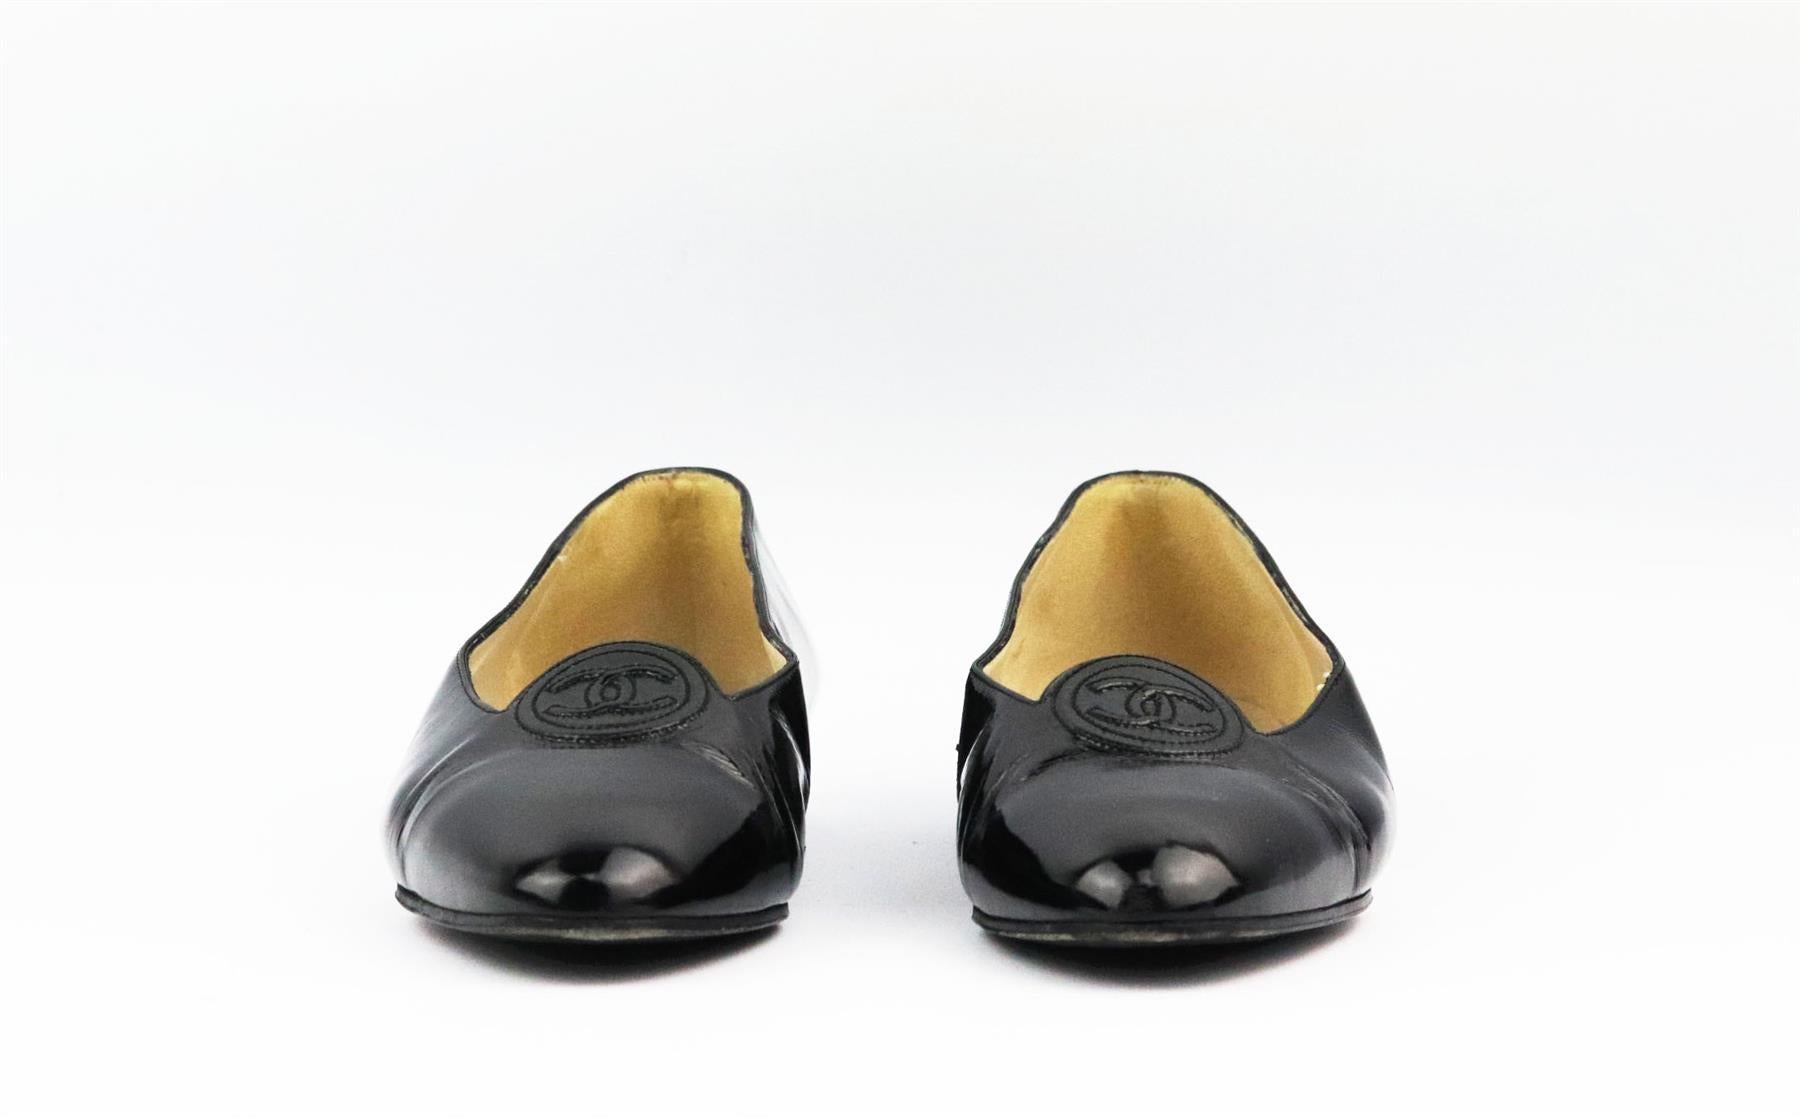 These vintage ballerina flats by Chanel are always stand out pieces, even designs as classic as these flats, made in Italy from black patent leather and that are balanced out with an almond toe and CC embroidered detail. Sole measures approximately